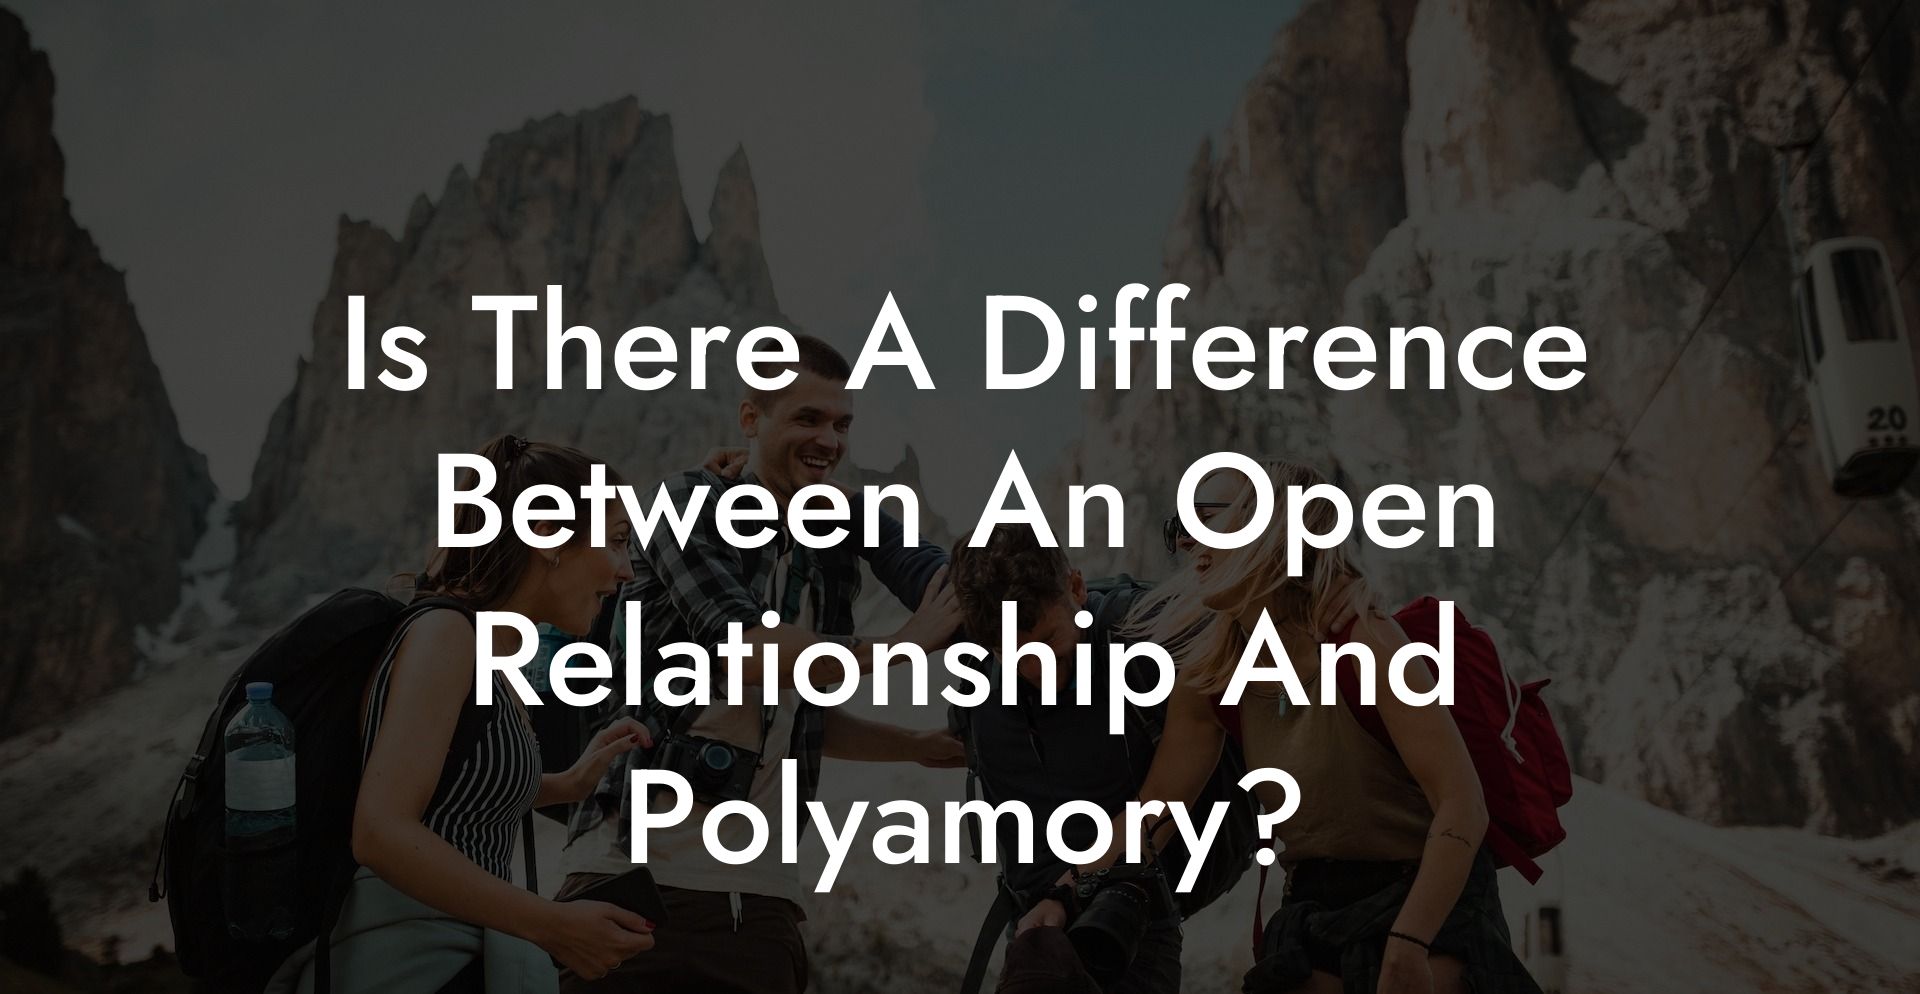 Is There A Difference Between An Open Relationship And Polyamory?